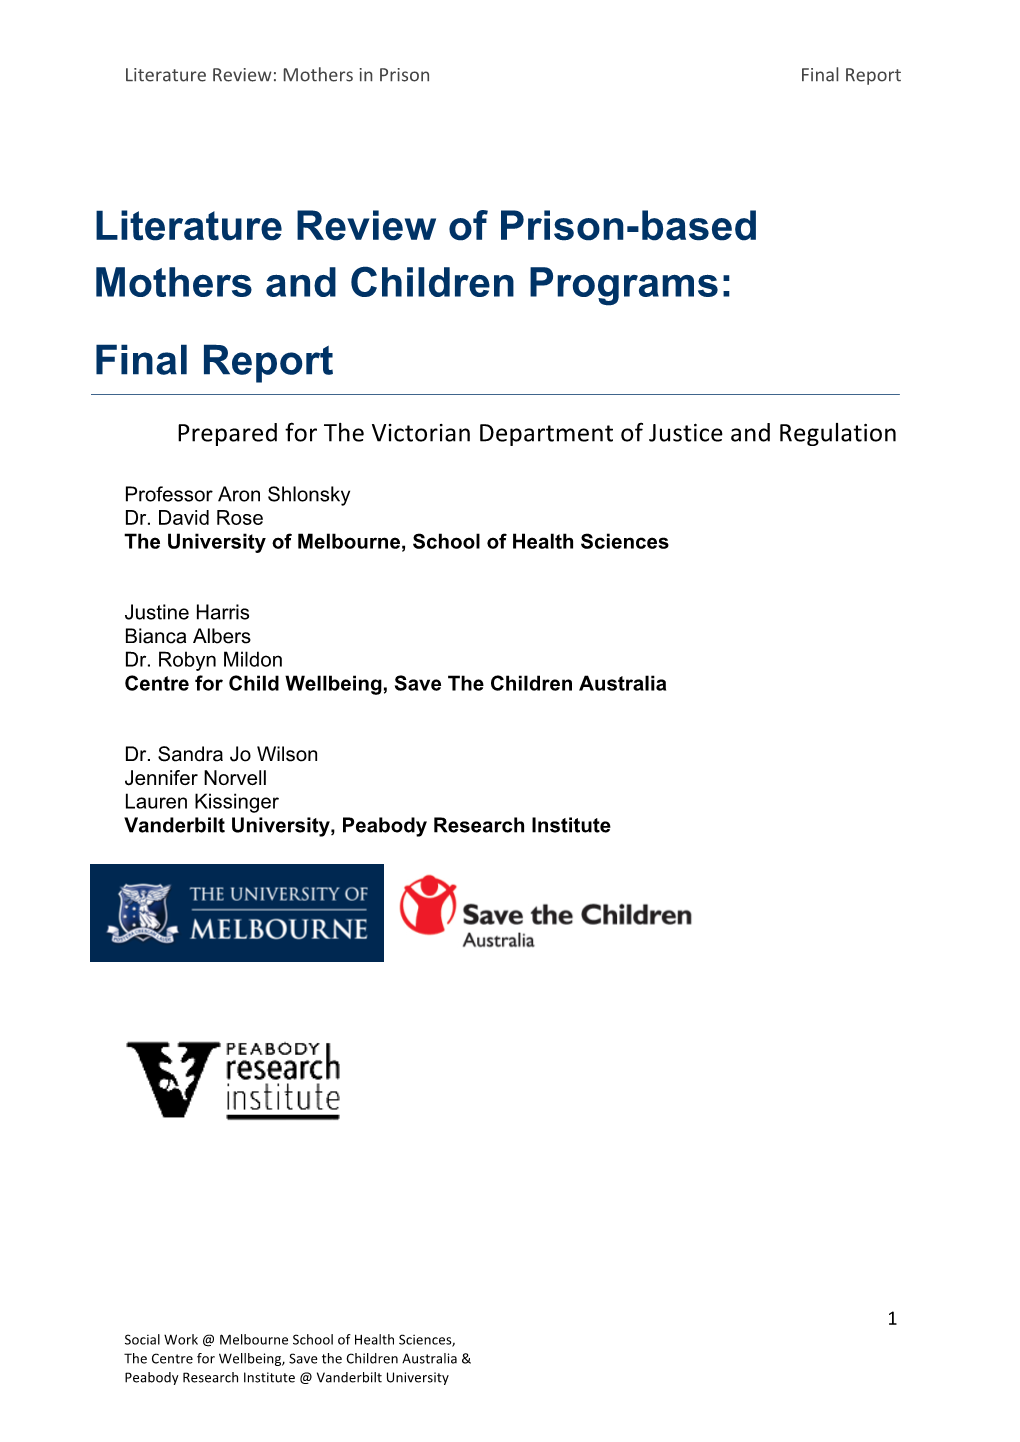 Literature Review of Prison-Based Mothers and Children Programs: Final Report